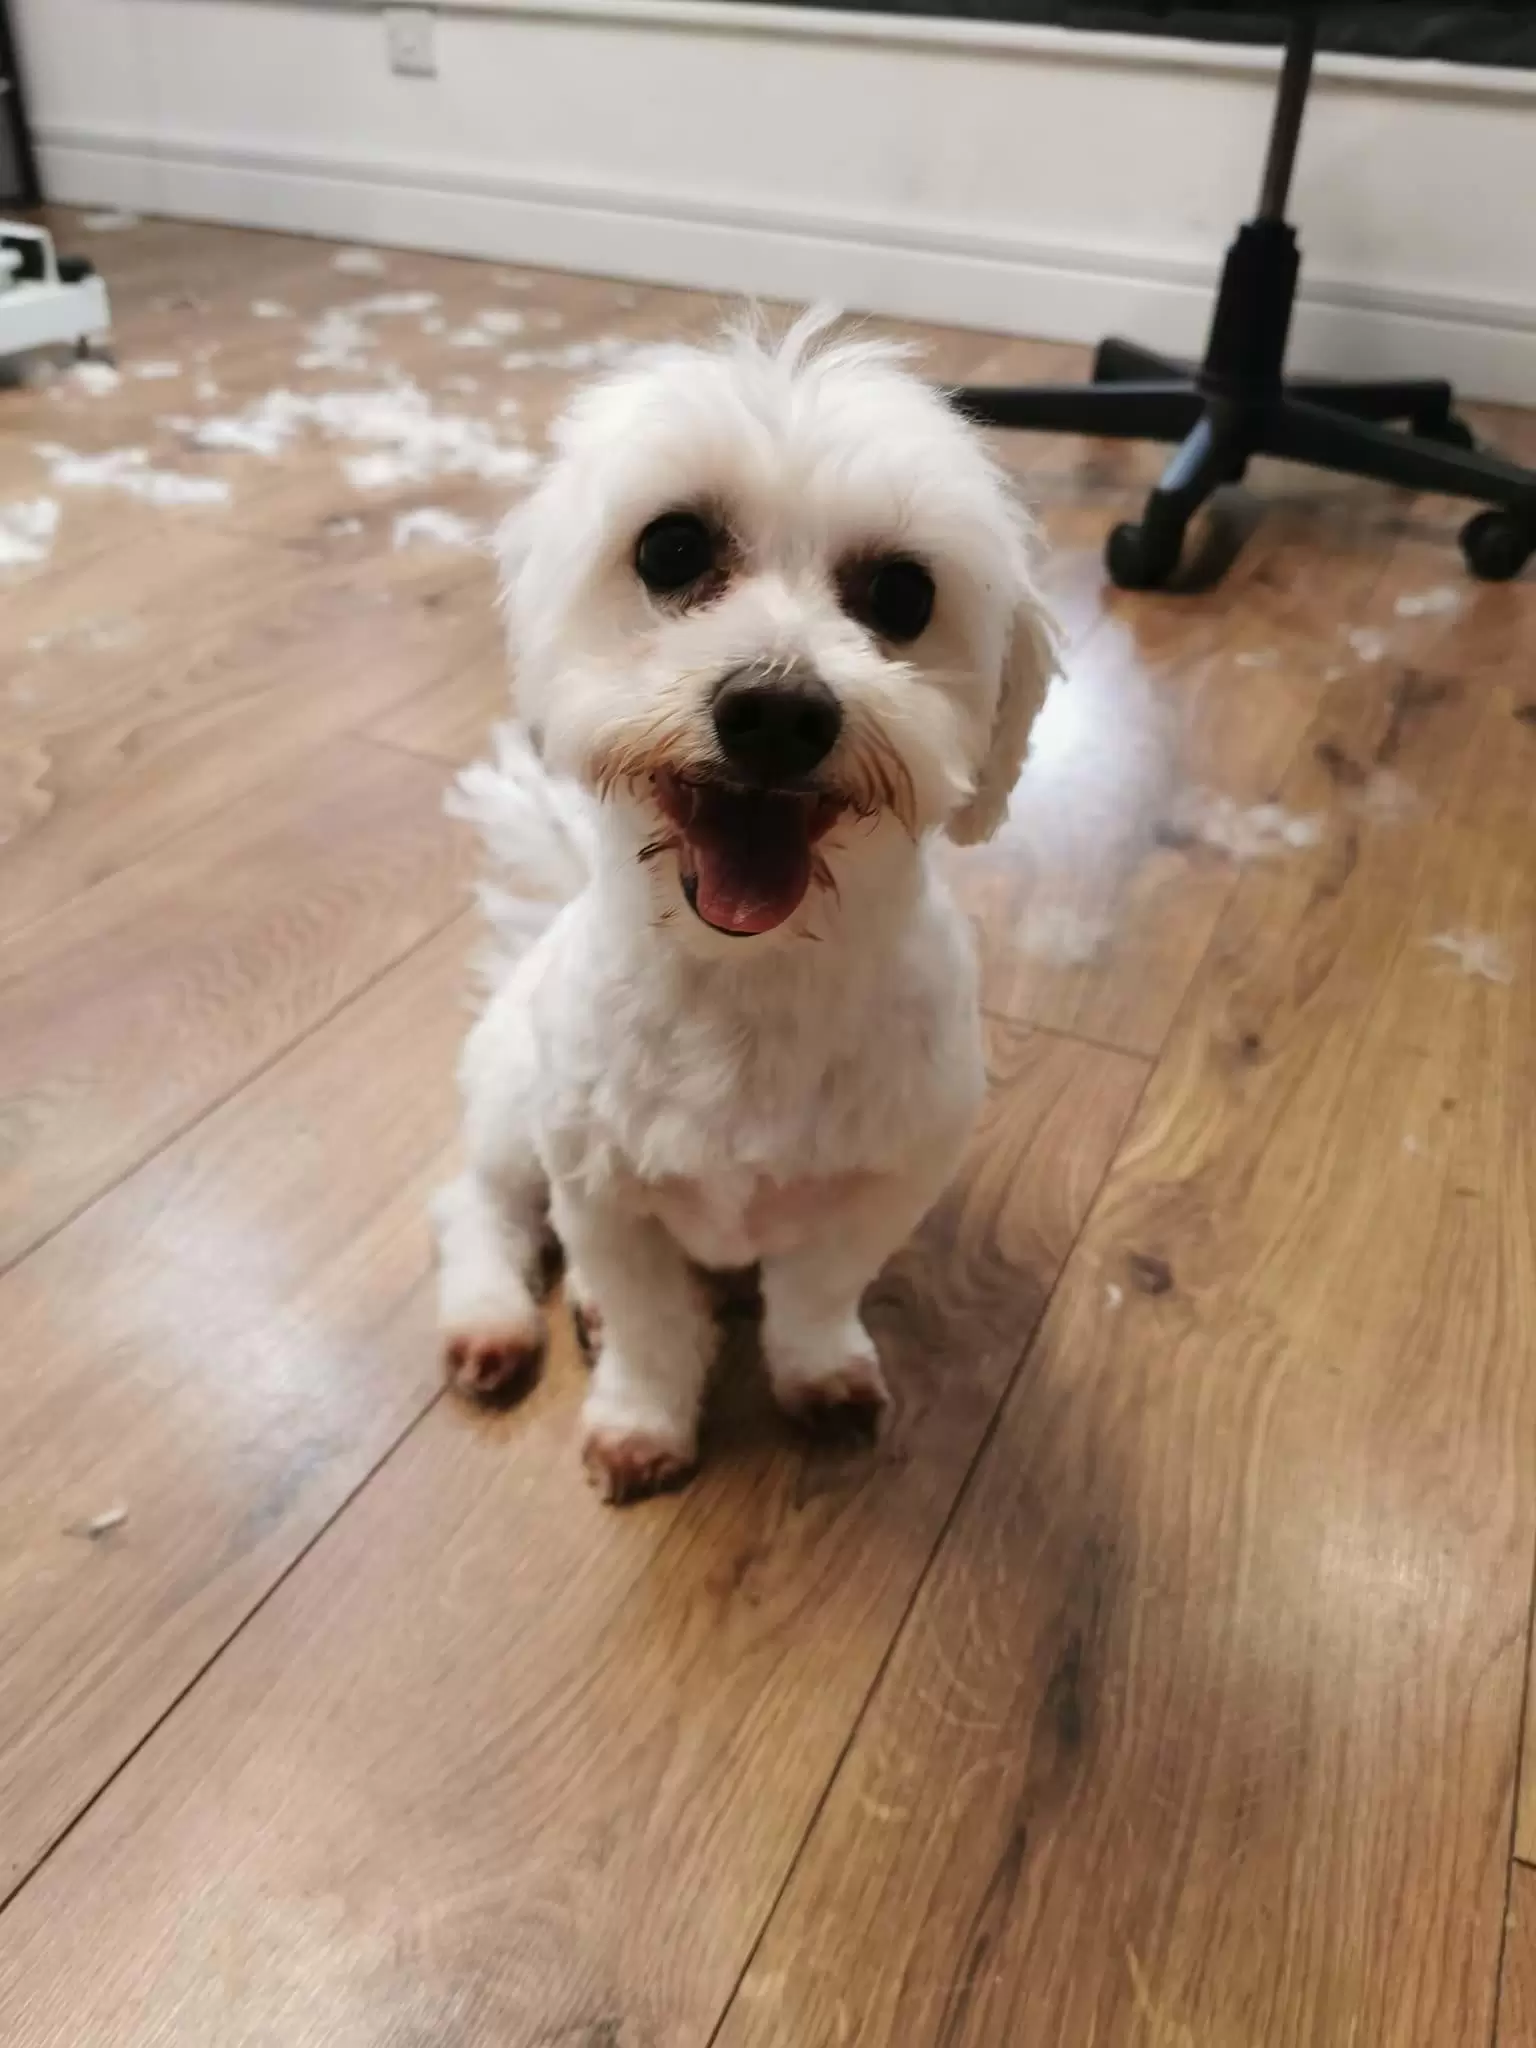 Small White Dog After getting a Haircut, with tounge out and smiling